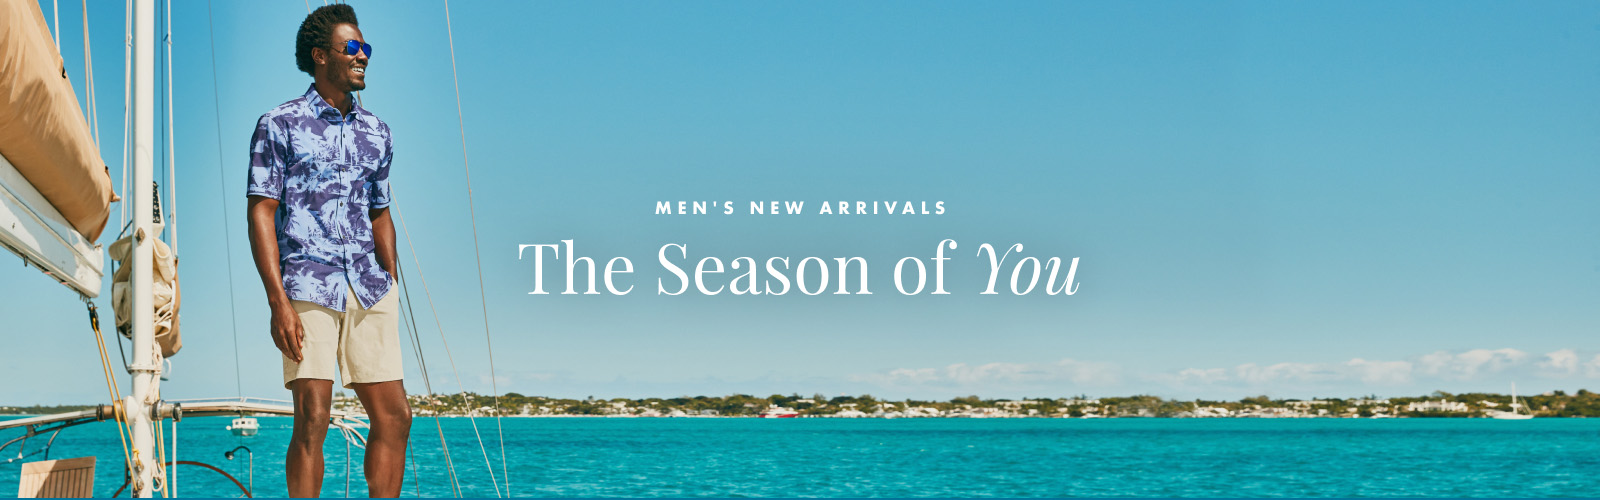 Men's New Arrivals - The Season of You